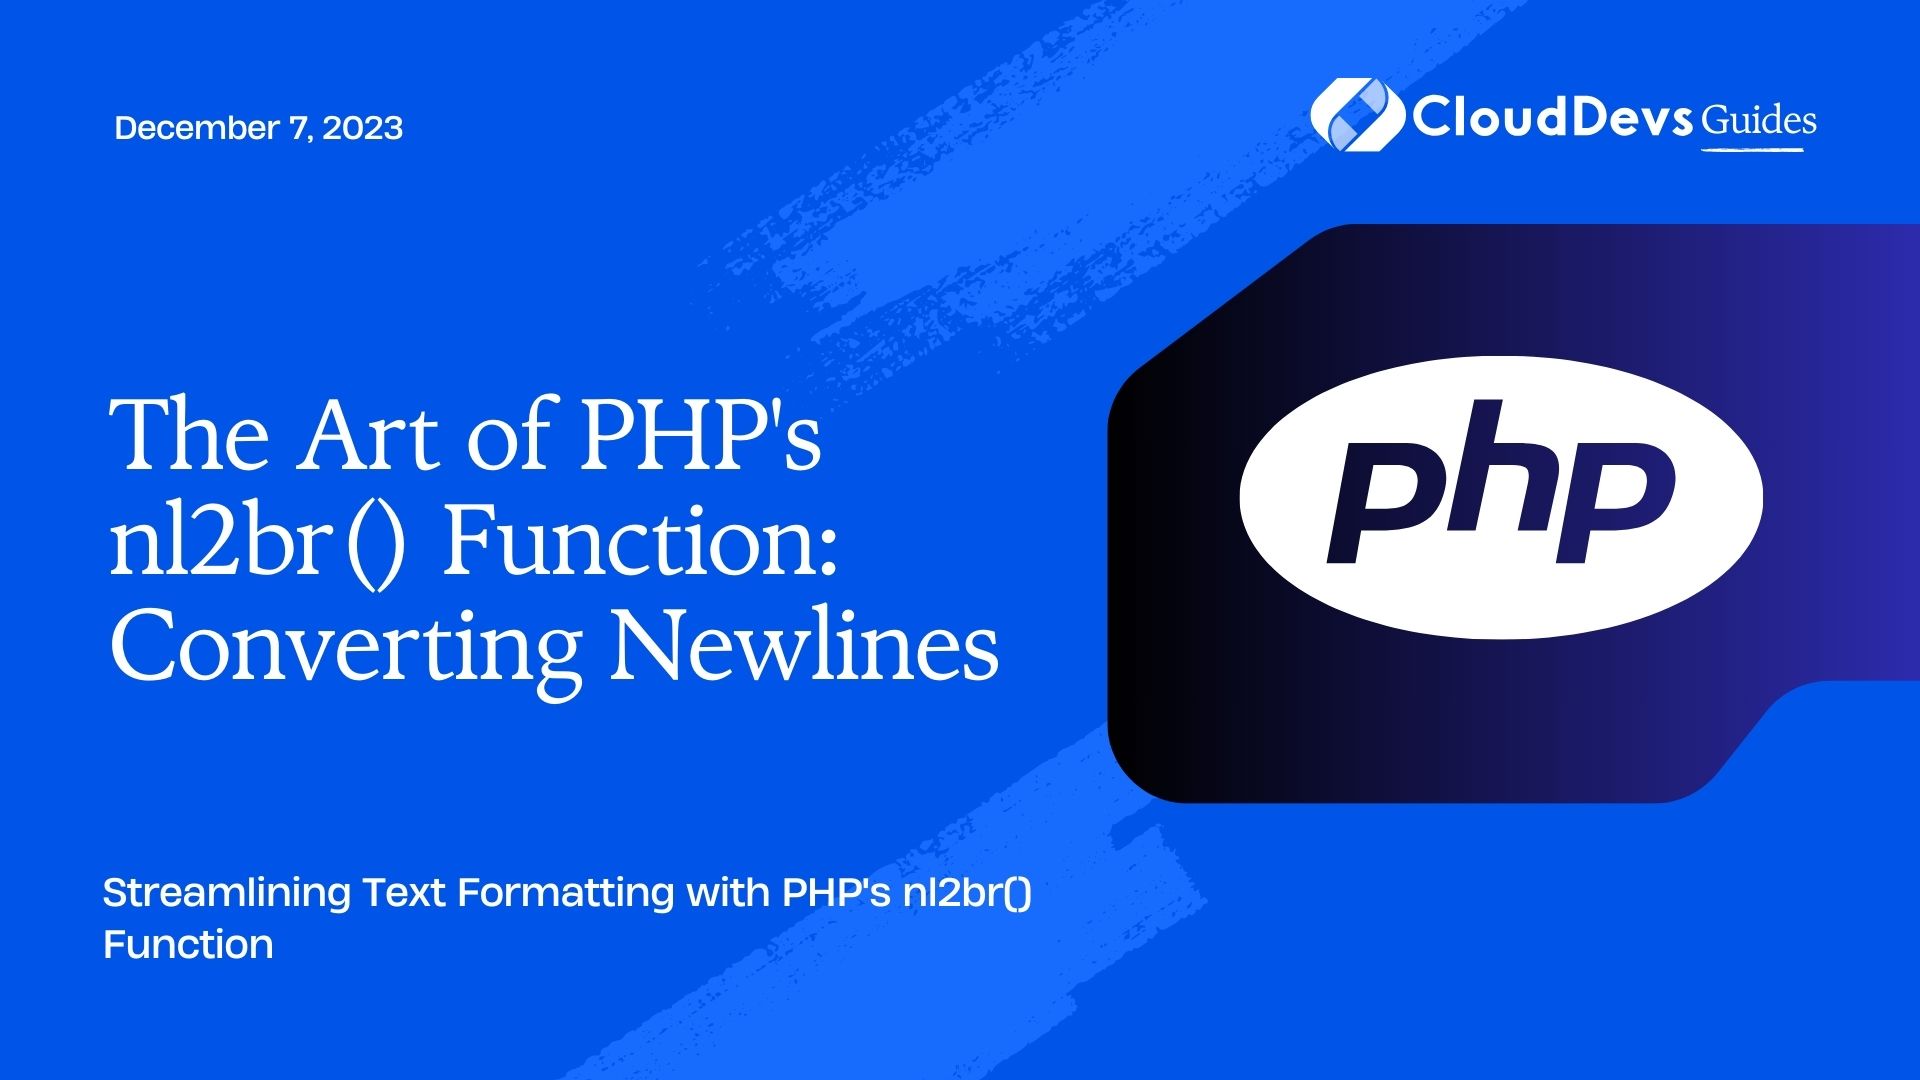 The Art of PHP's nl2br() Function: Converting Newlines